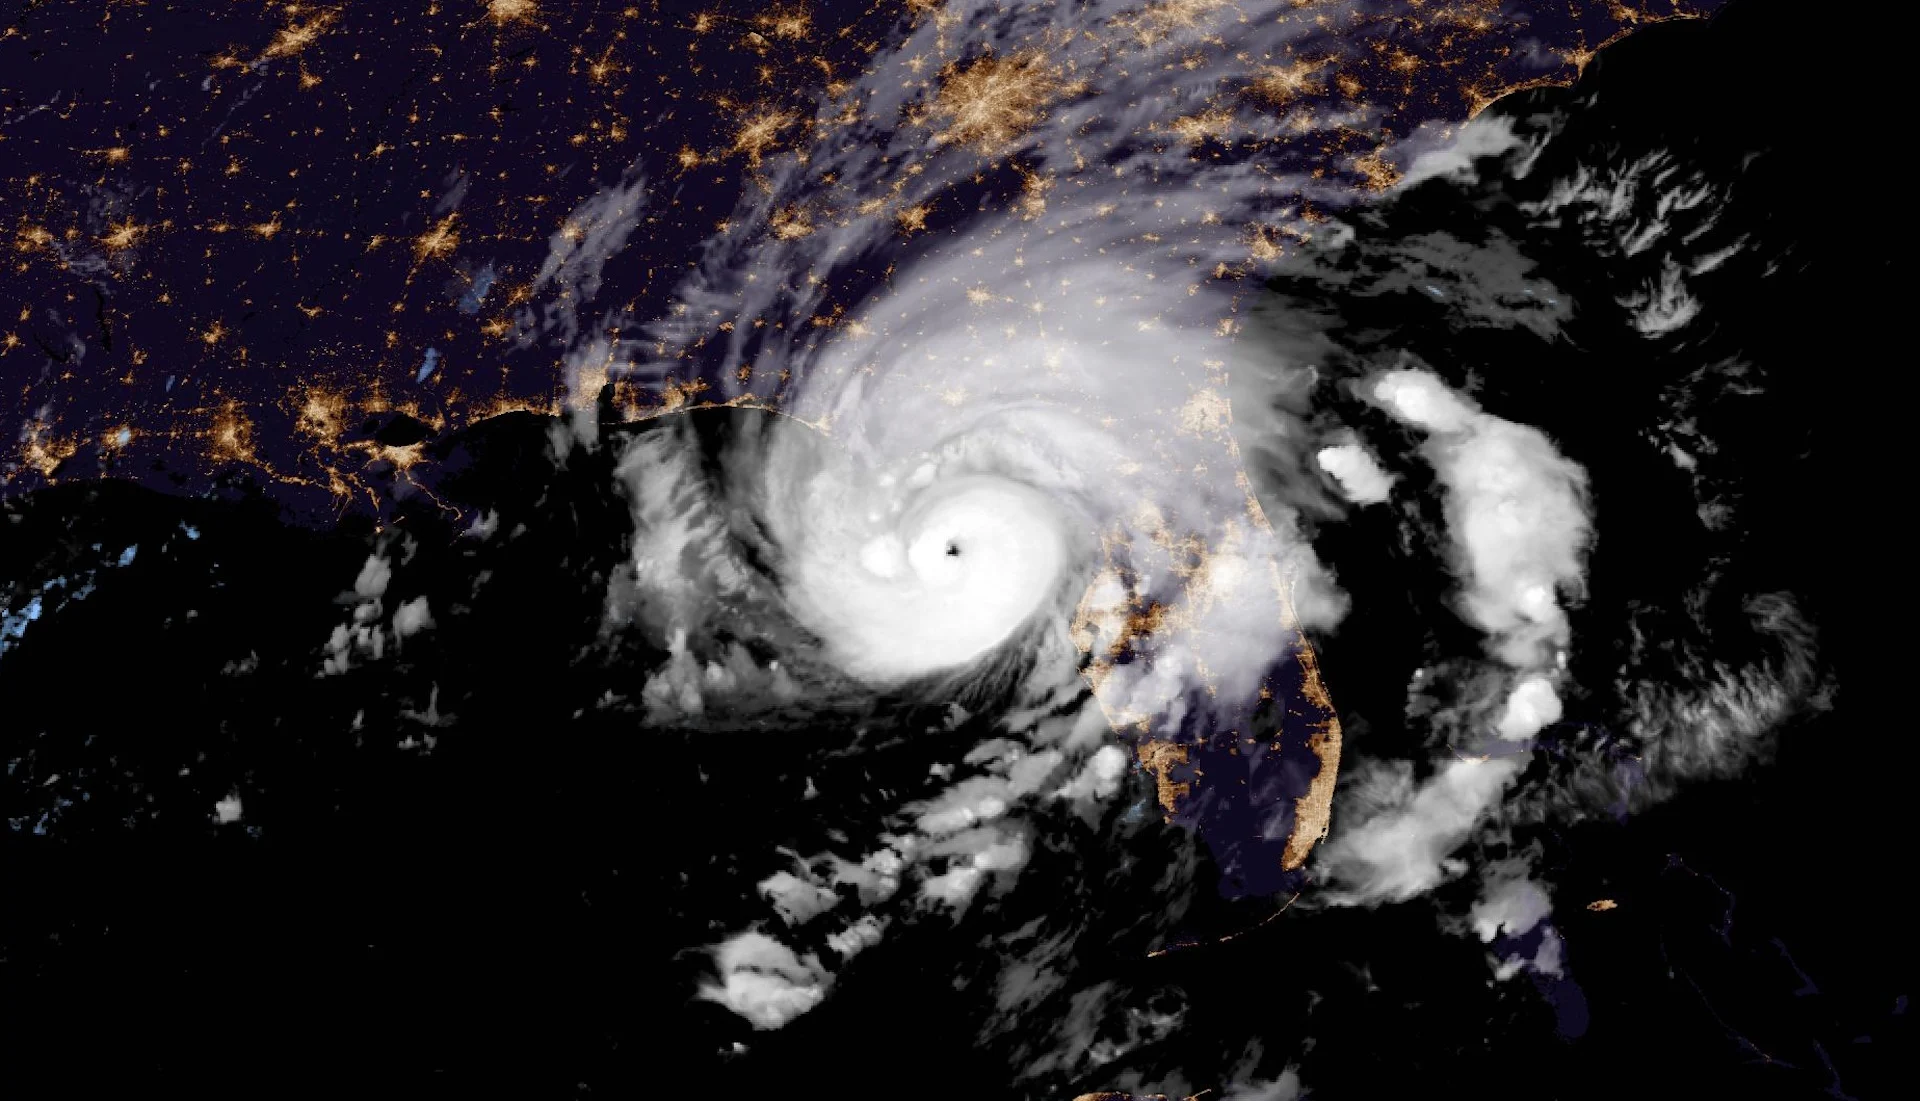 Hurricane Idalia was so intense it may have blunted future storms